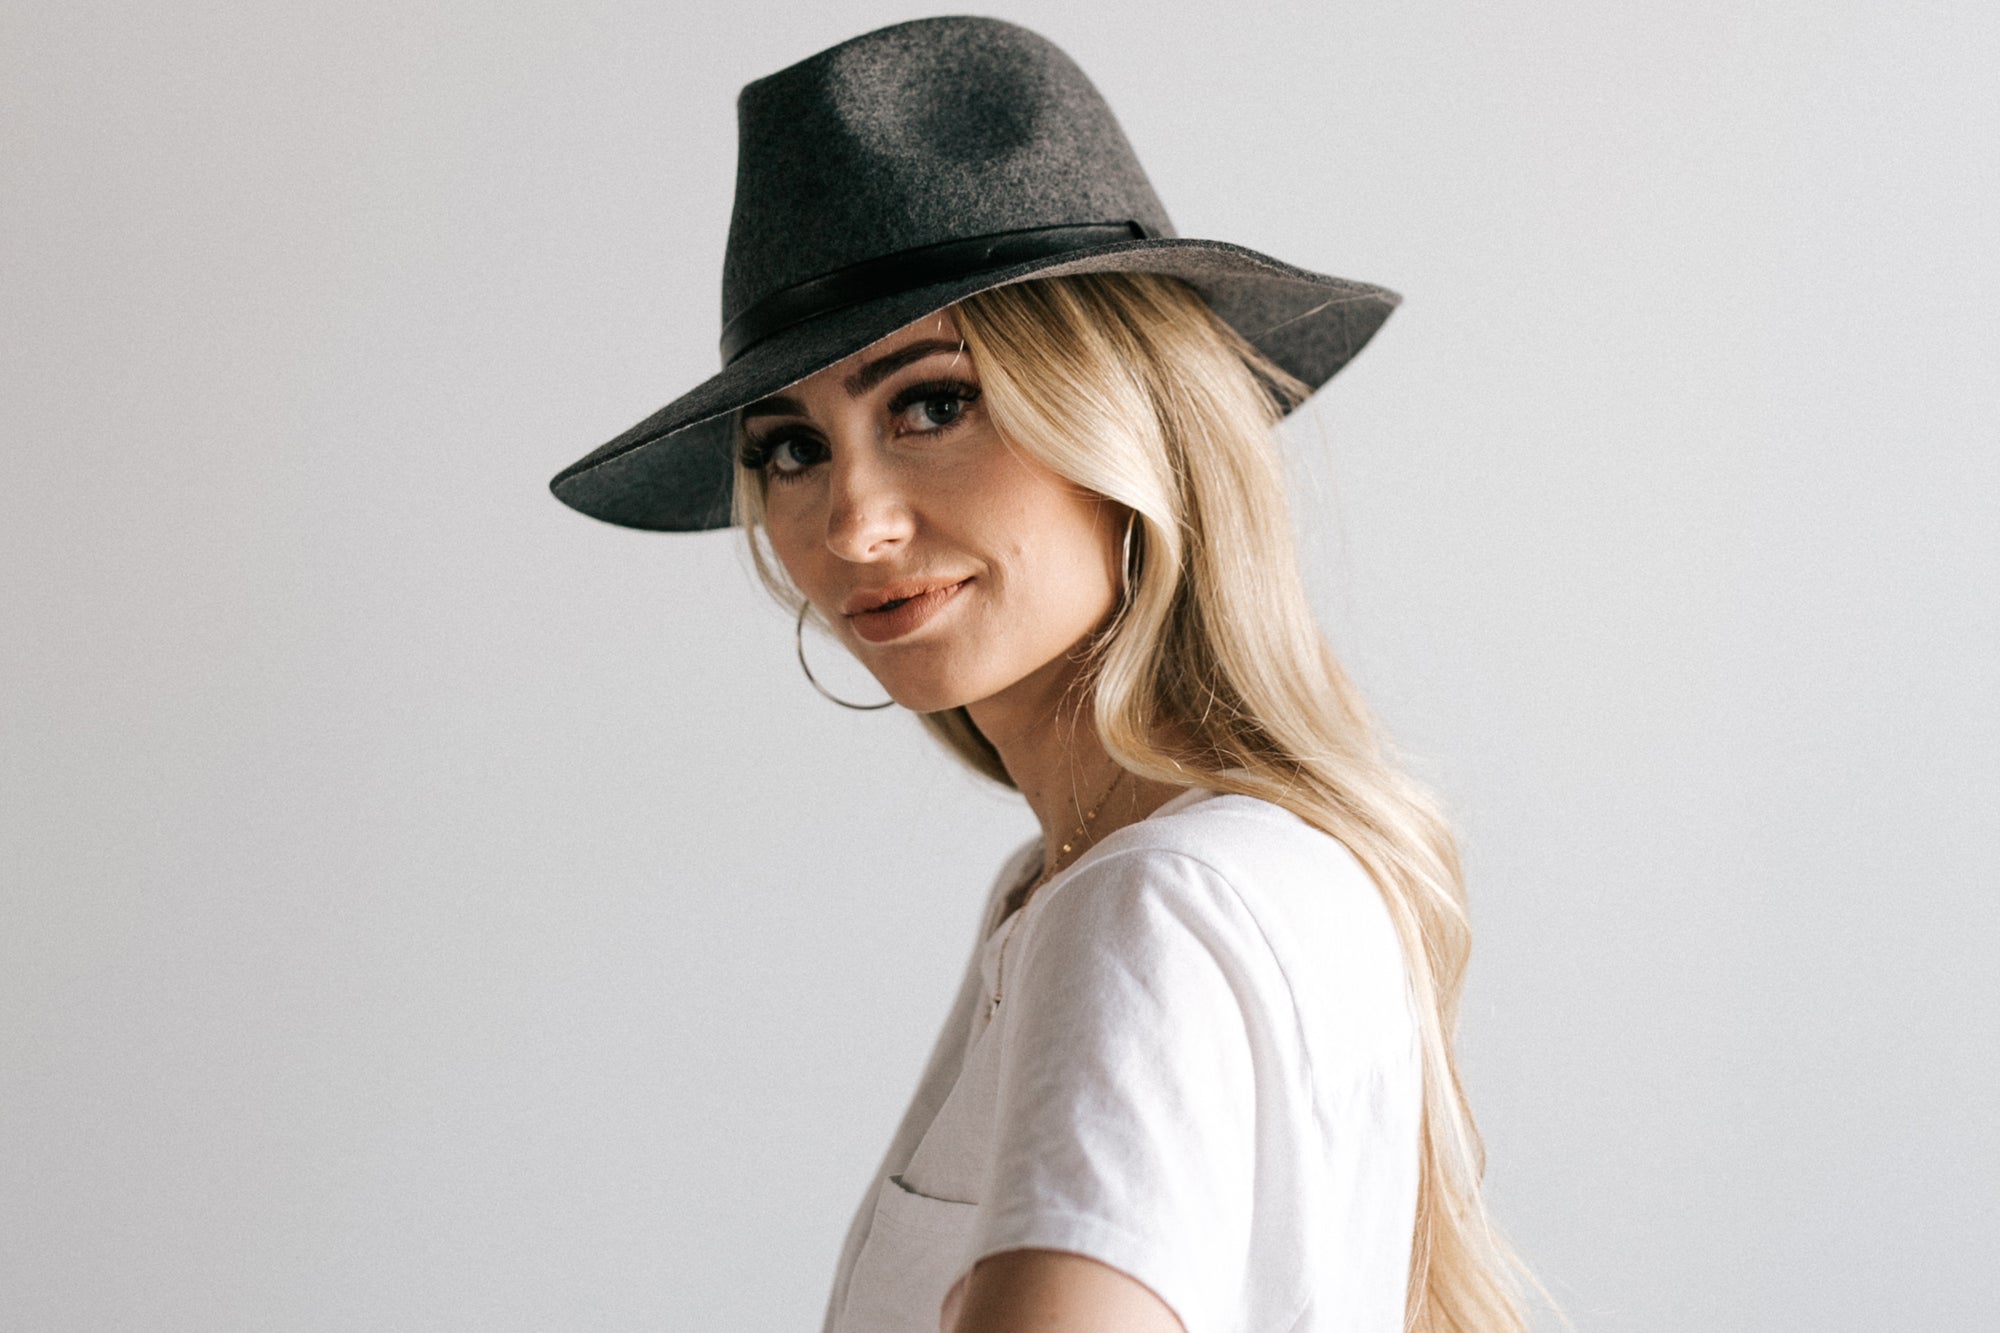 Woman in felt hat smiling at camera